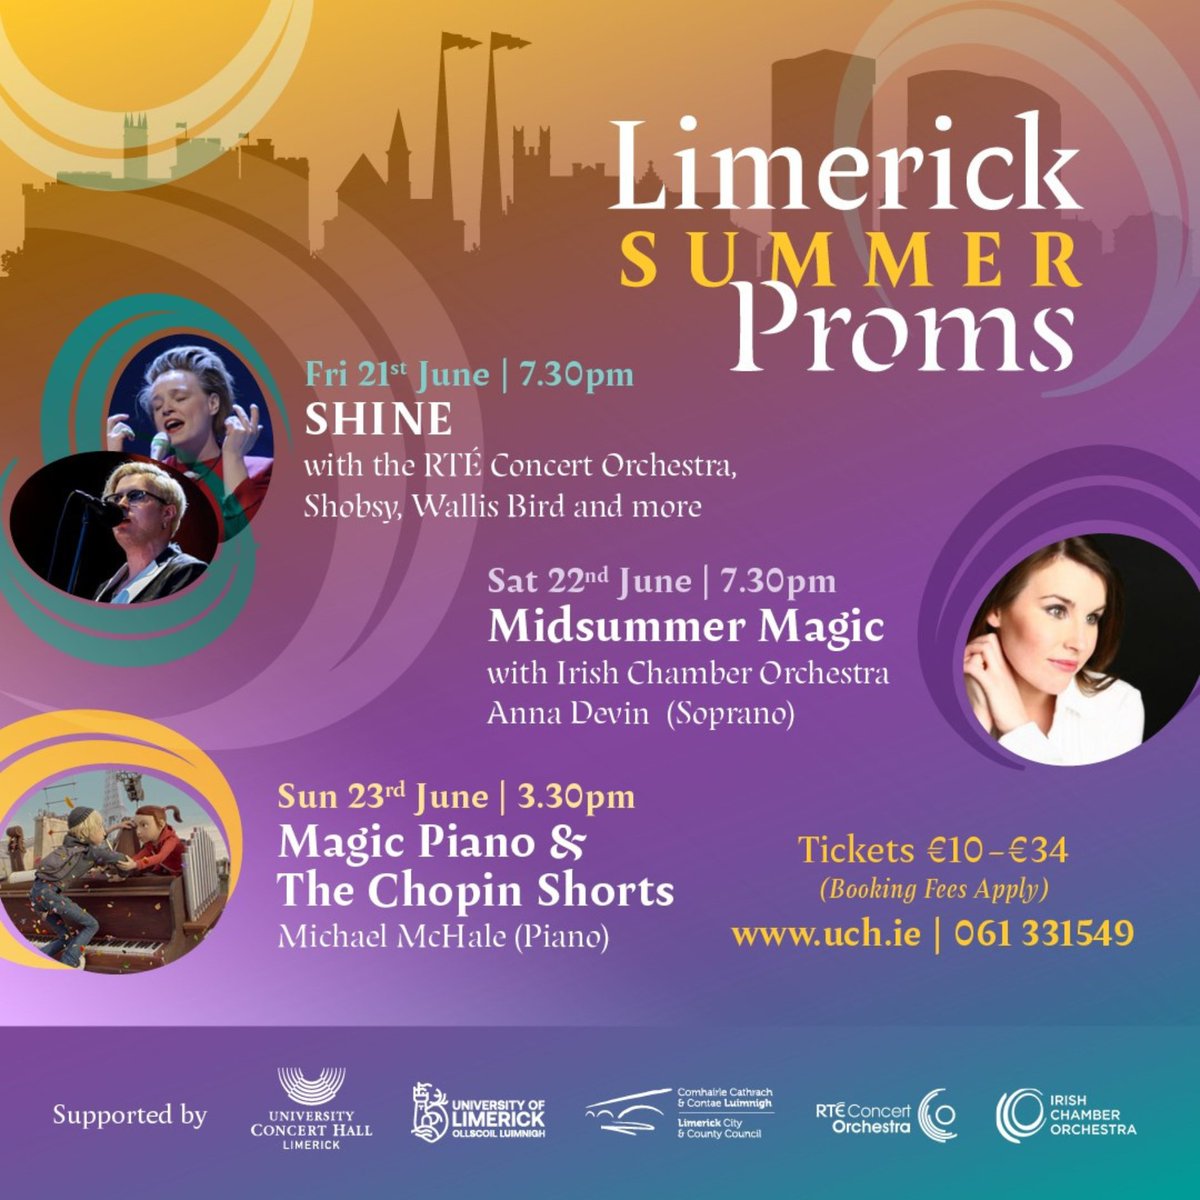 🎶 Don't miss the LIMERICK SUMMER PROMS on Saturday, June 22nd, 7:30 pm at @UCHLimerick ! Experience 'Midsummer Magic' with the Irish Chamber Orchestra. Enjoy 20% off full price tickets for SHINE & Midsummer Magic until 29.04.24. Book now!  bit.ly/3Q4DpCj🌟 #MusicEvent